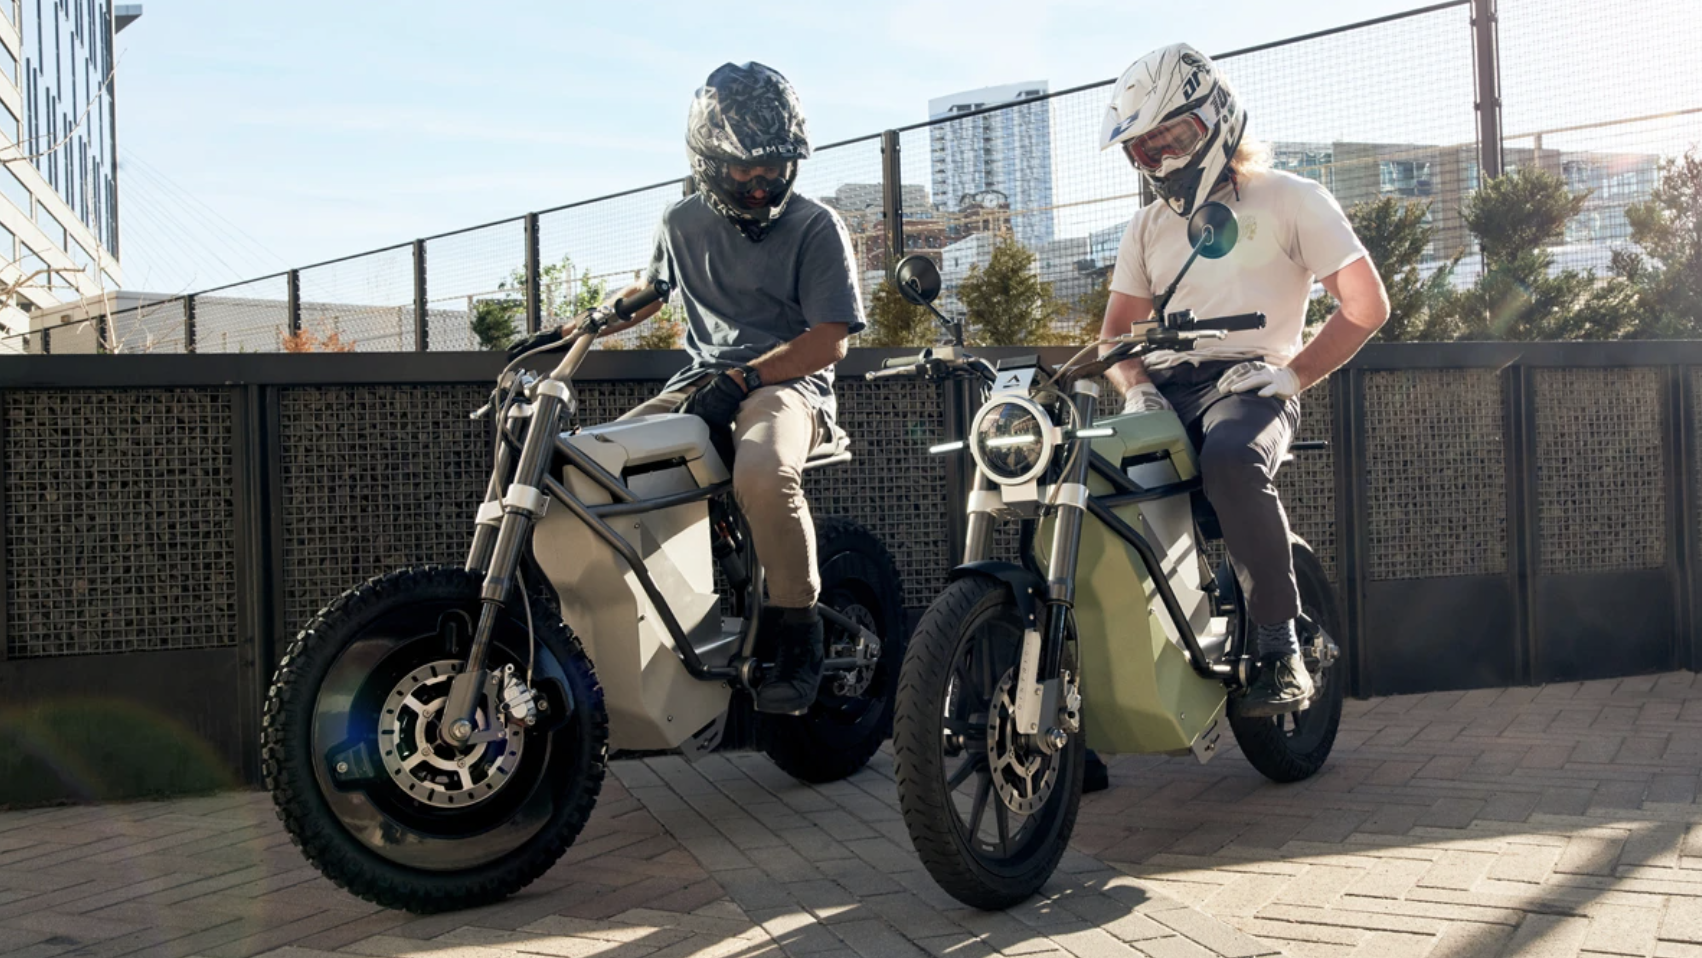 Land Energy Could Make A Capable Lightweight Electric Motorcycle For The Trail